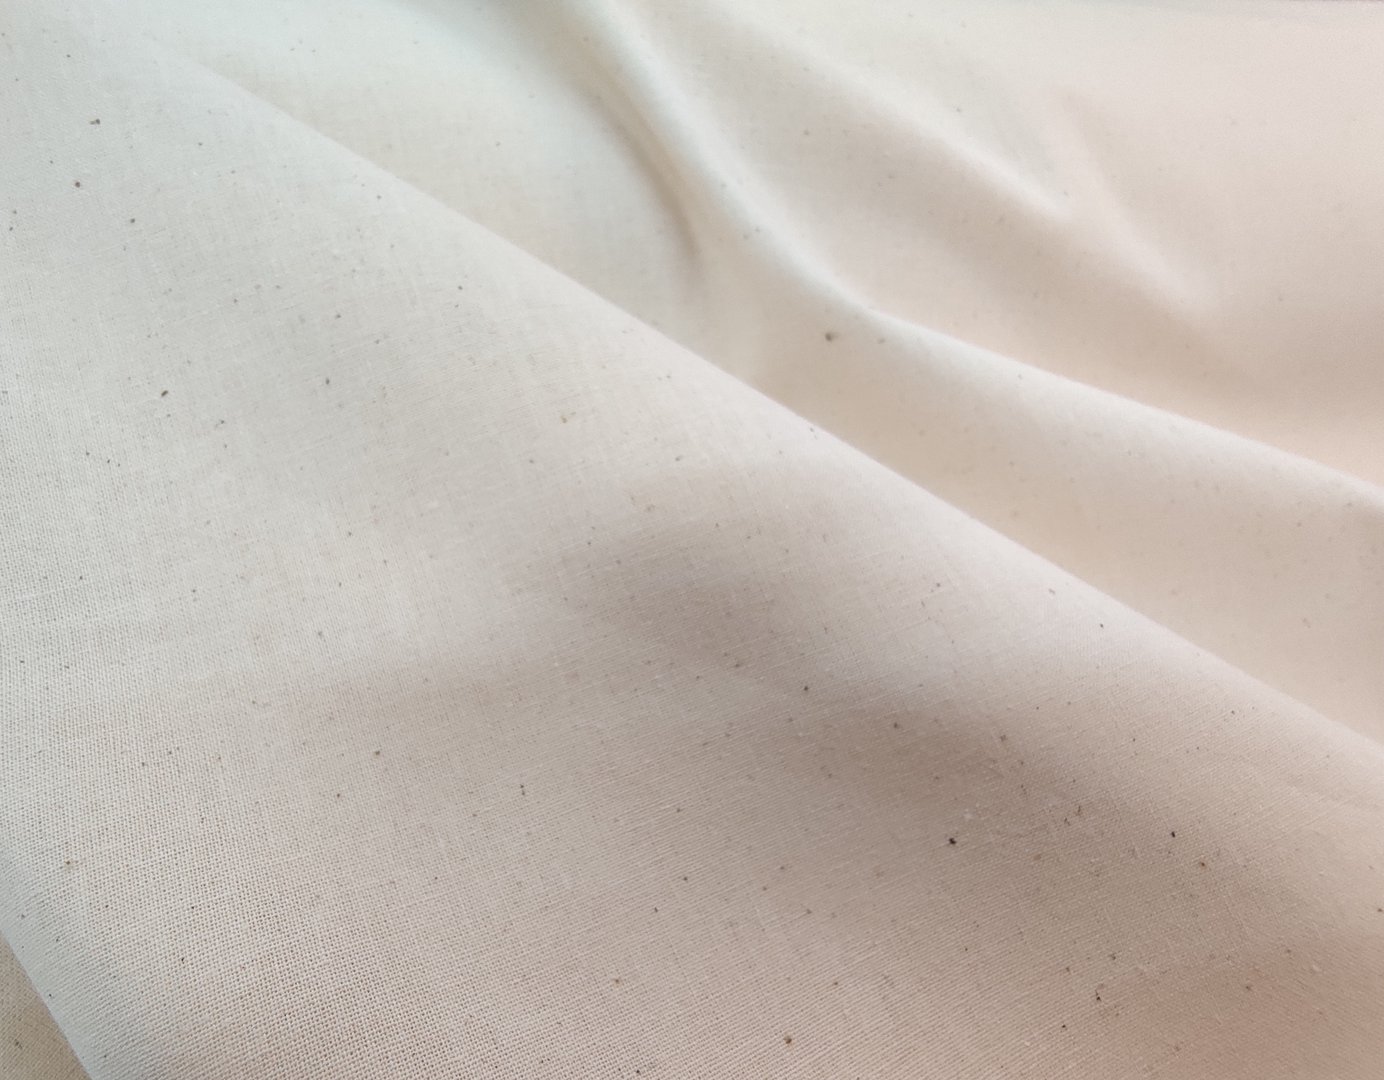 Unbleached cotton fabric